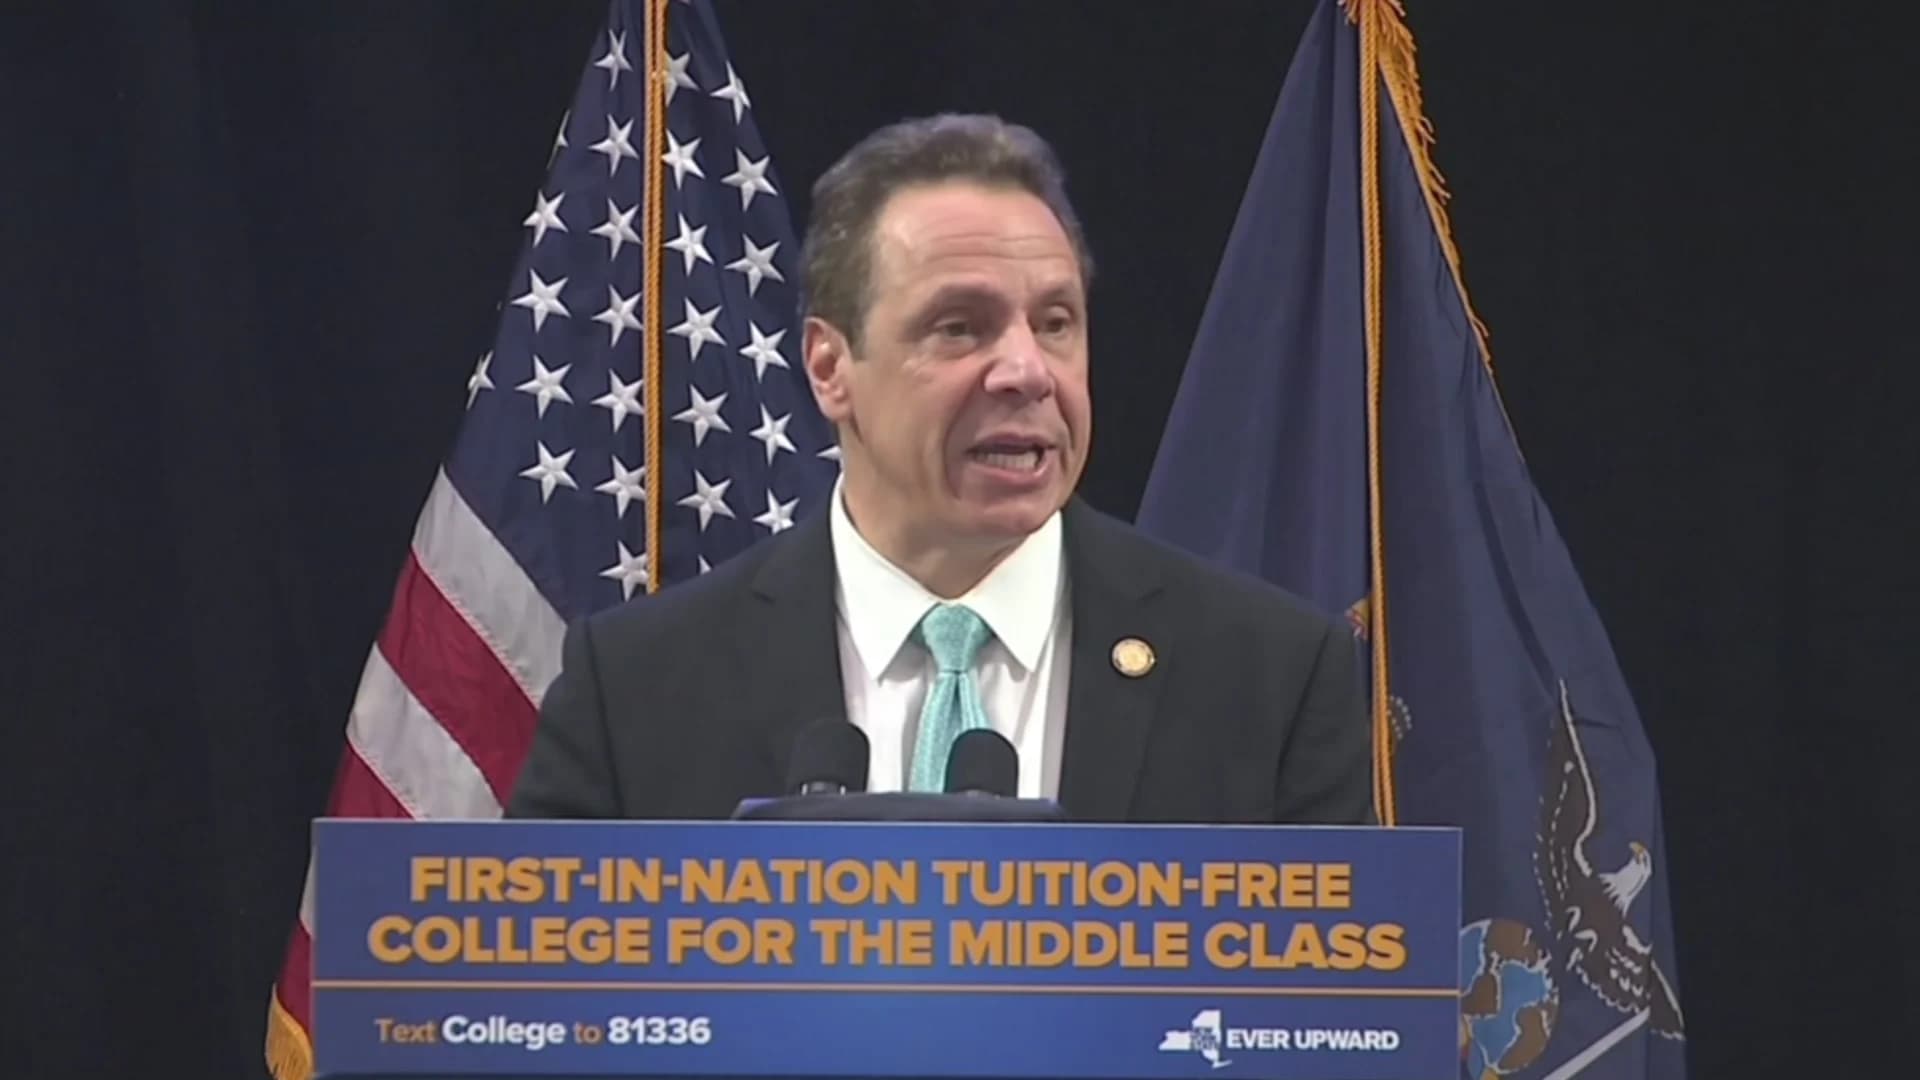 Pundits: Gov. Cuomo 'a clear front runner' for 2020 presidential bid